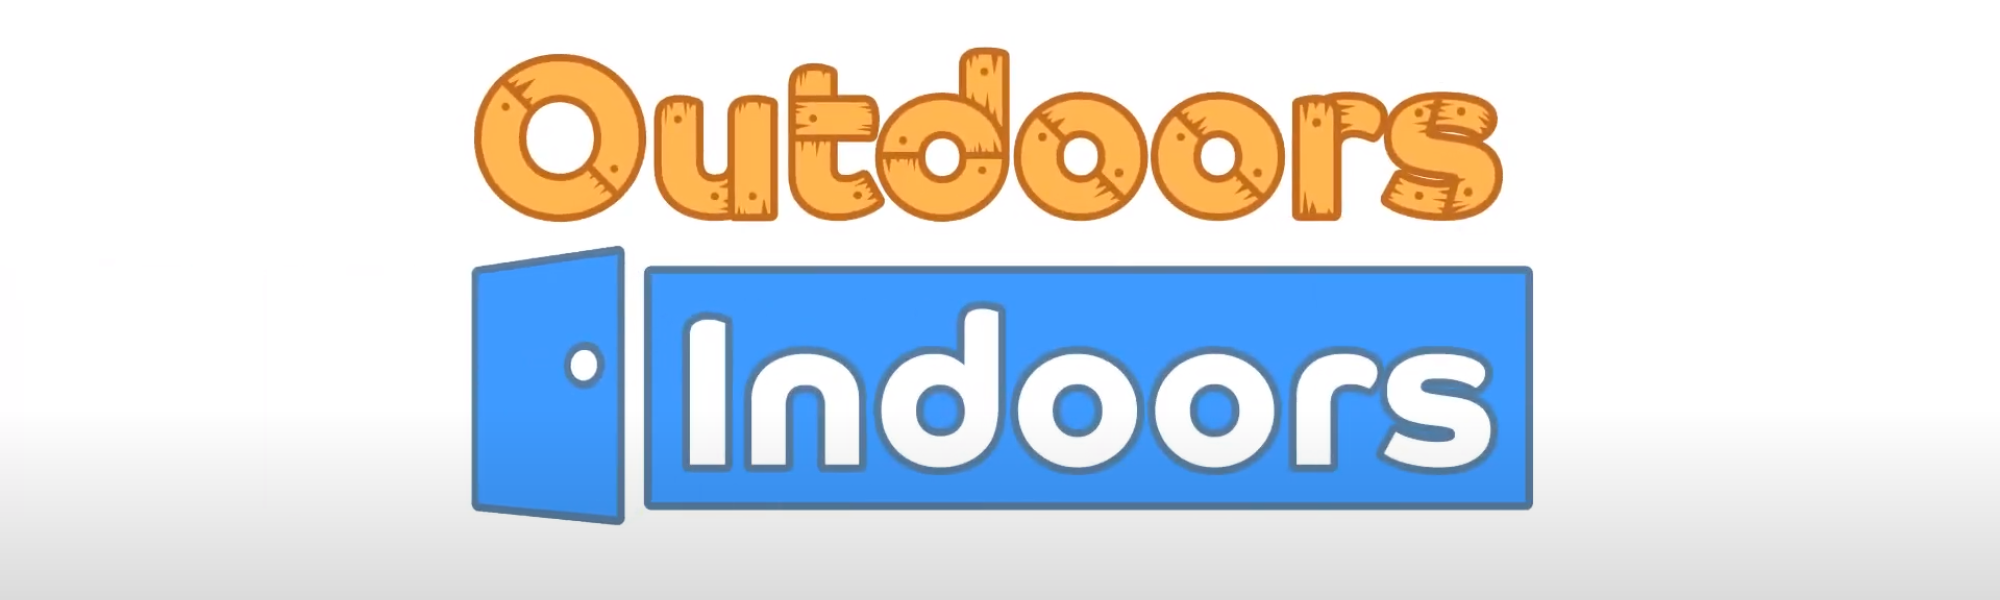 outdoors indoors